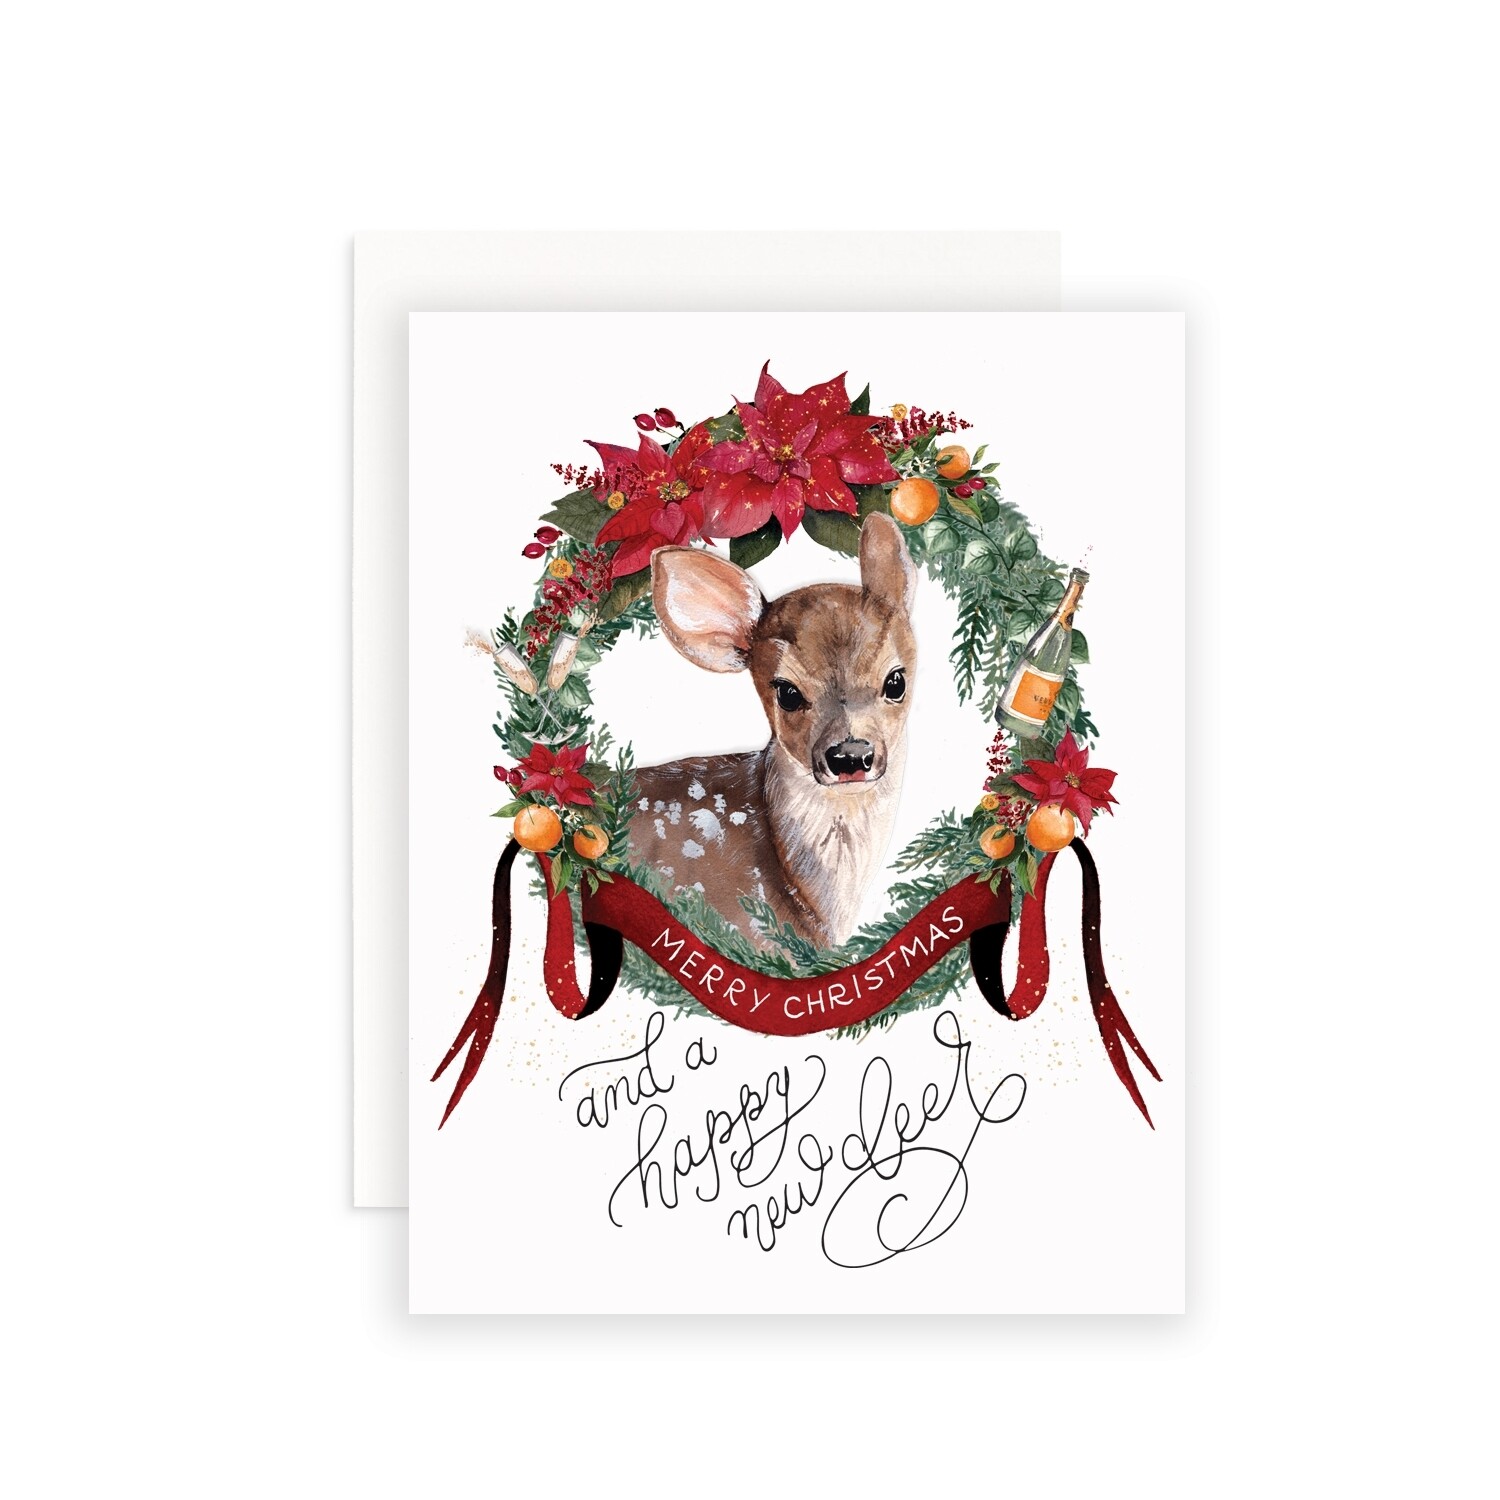 Merry Christmas & Happy New Deer New Year's Greeting Card